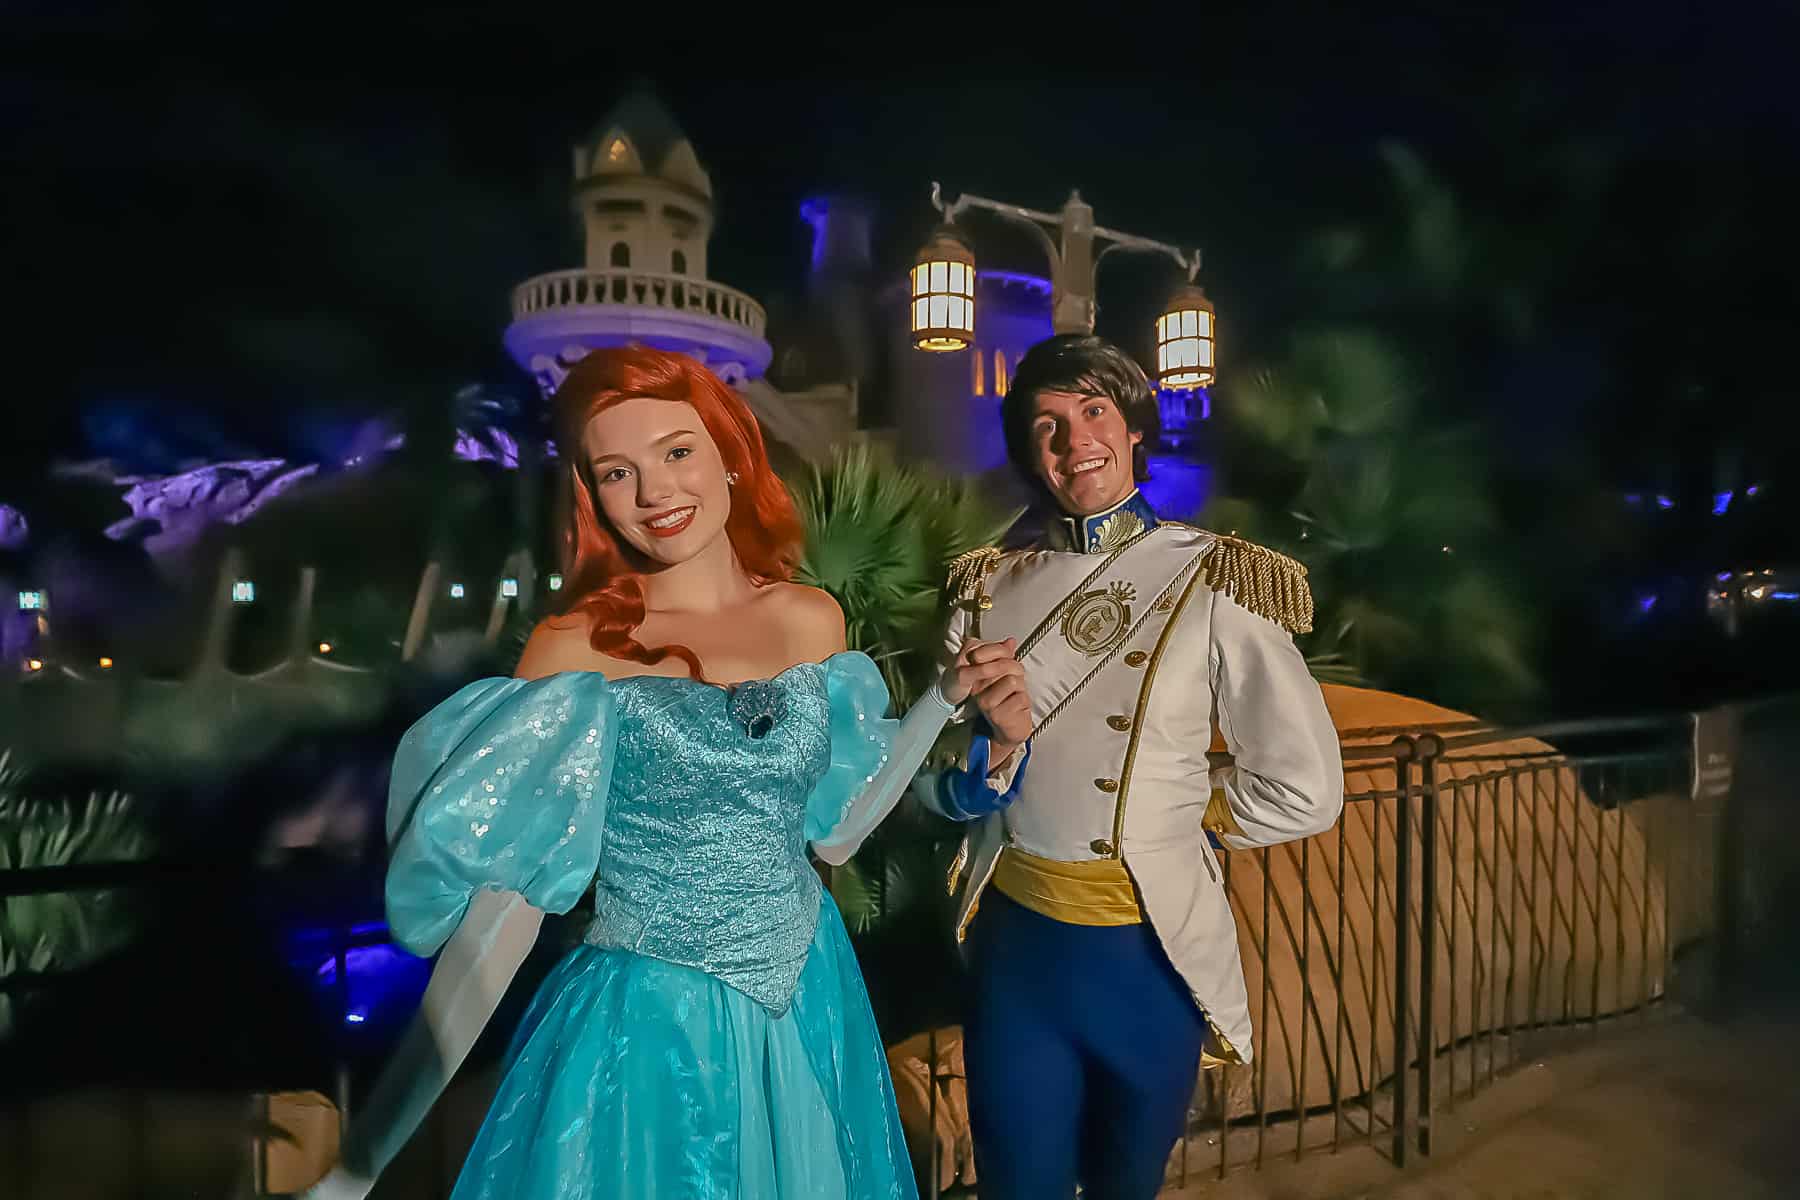 Ariel in her land dress with Prince Eric is his naval attire. 